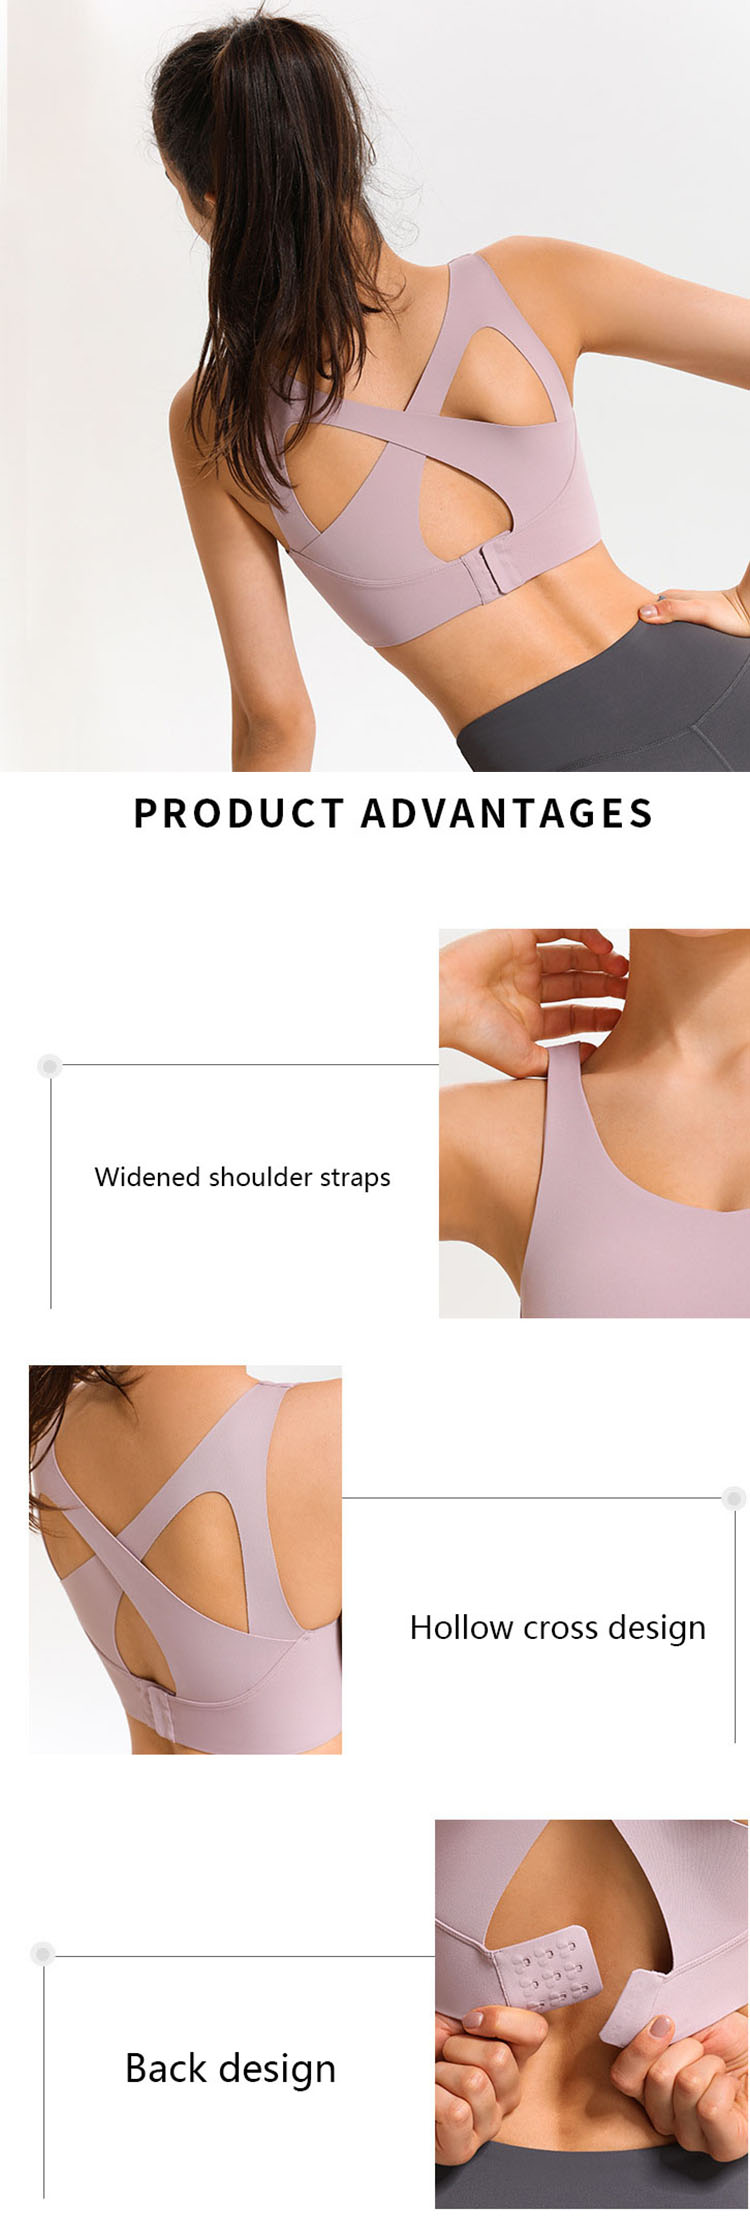 The best sports bra for large chest design on the chest or the cross-shaped back